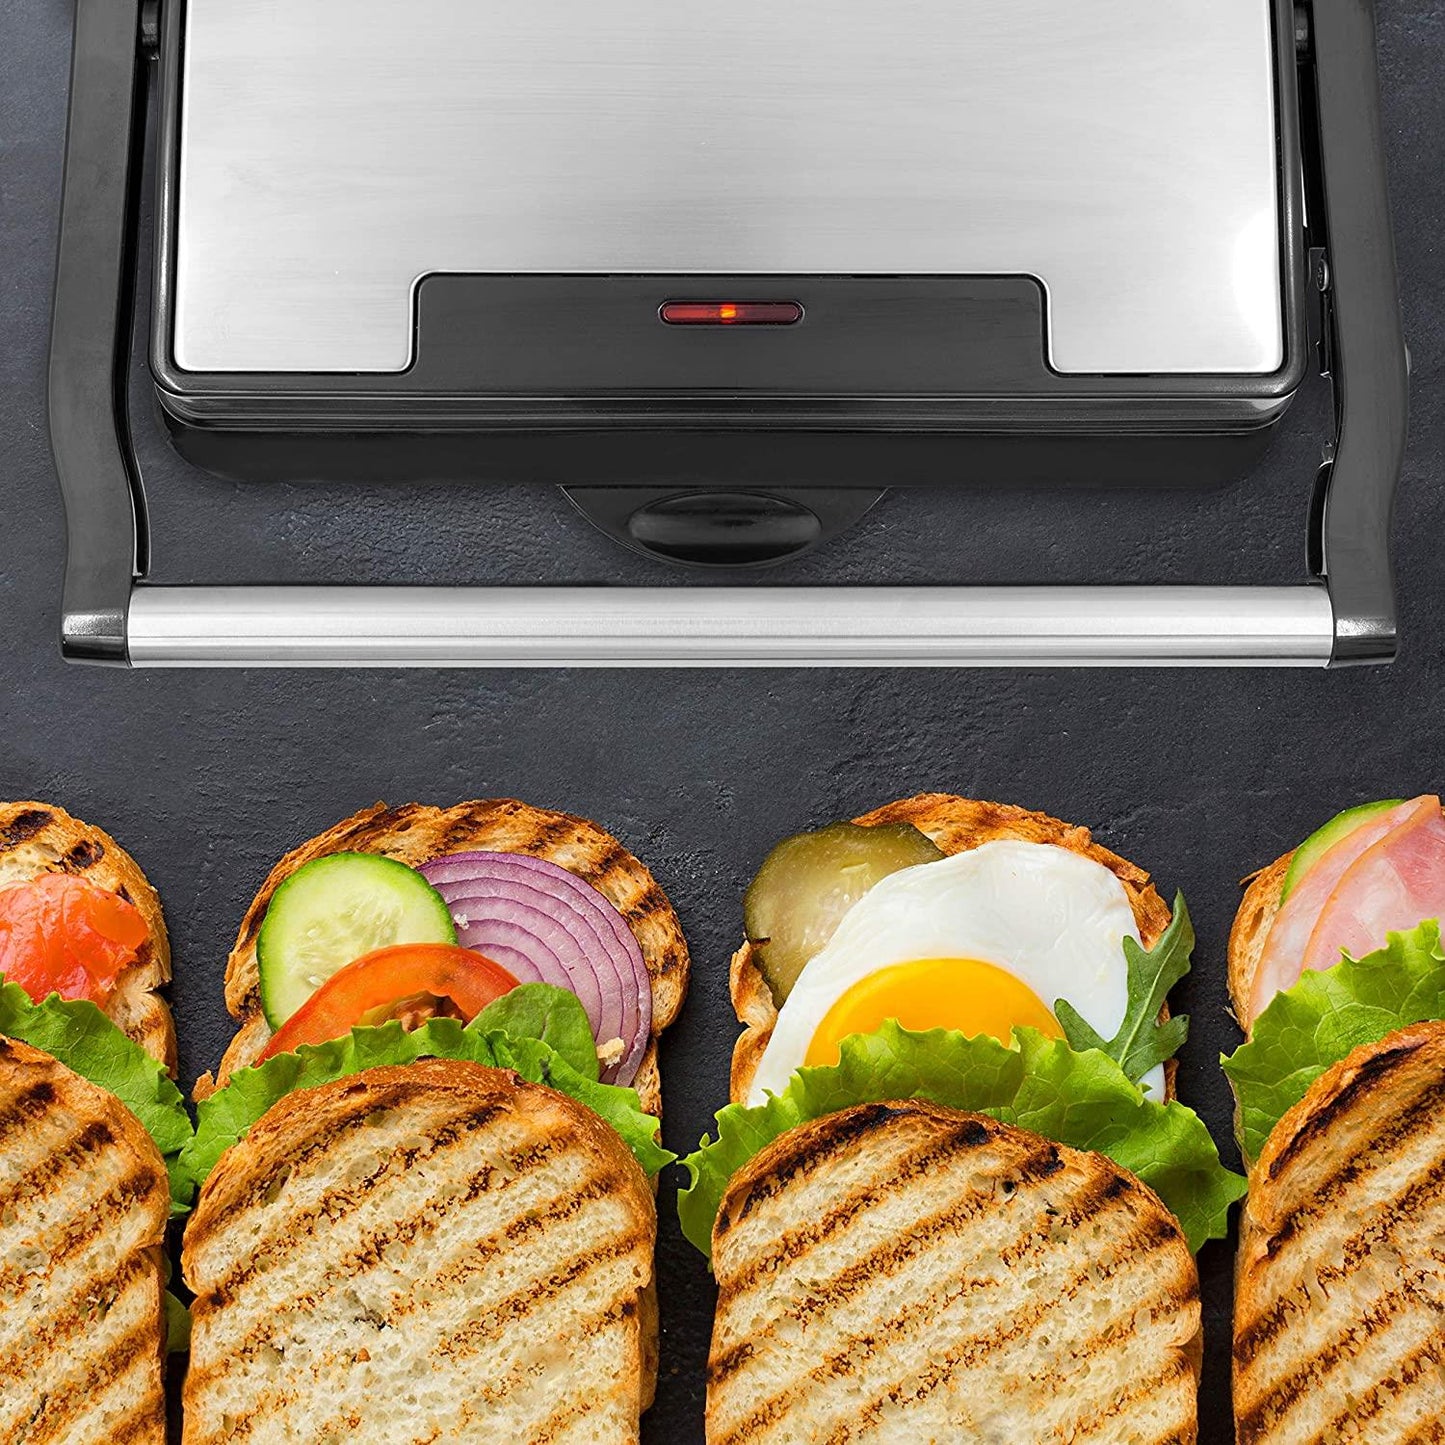 Quest Marble Coated Health Grill & Panini Press (Carton of 4)